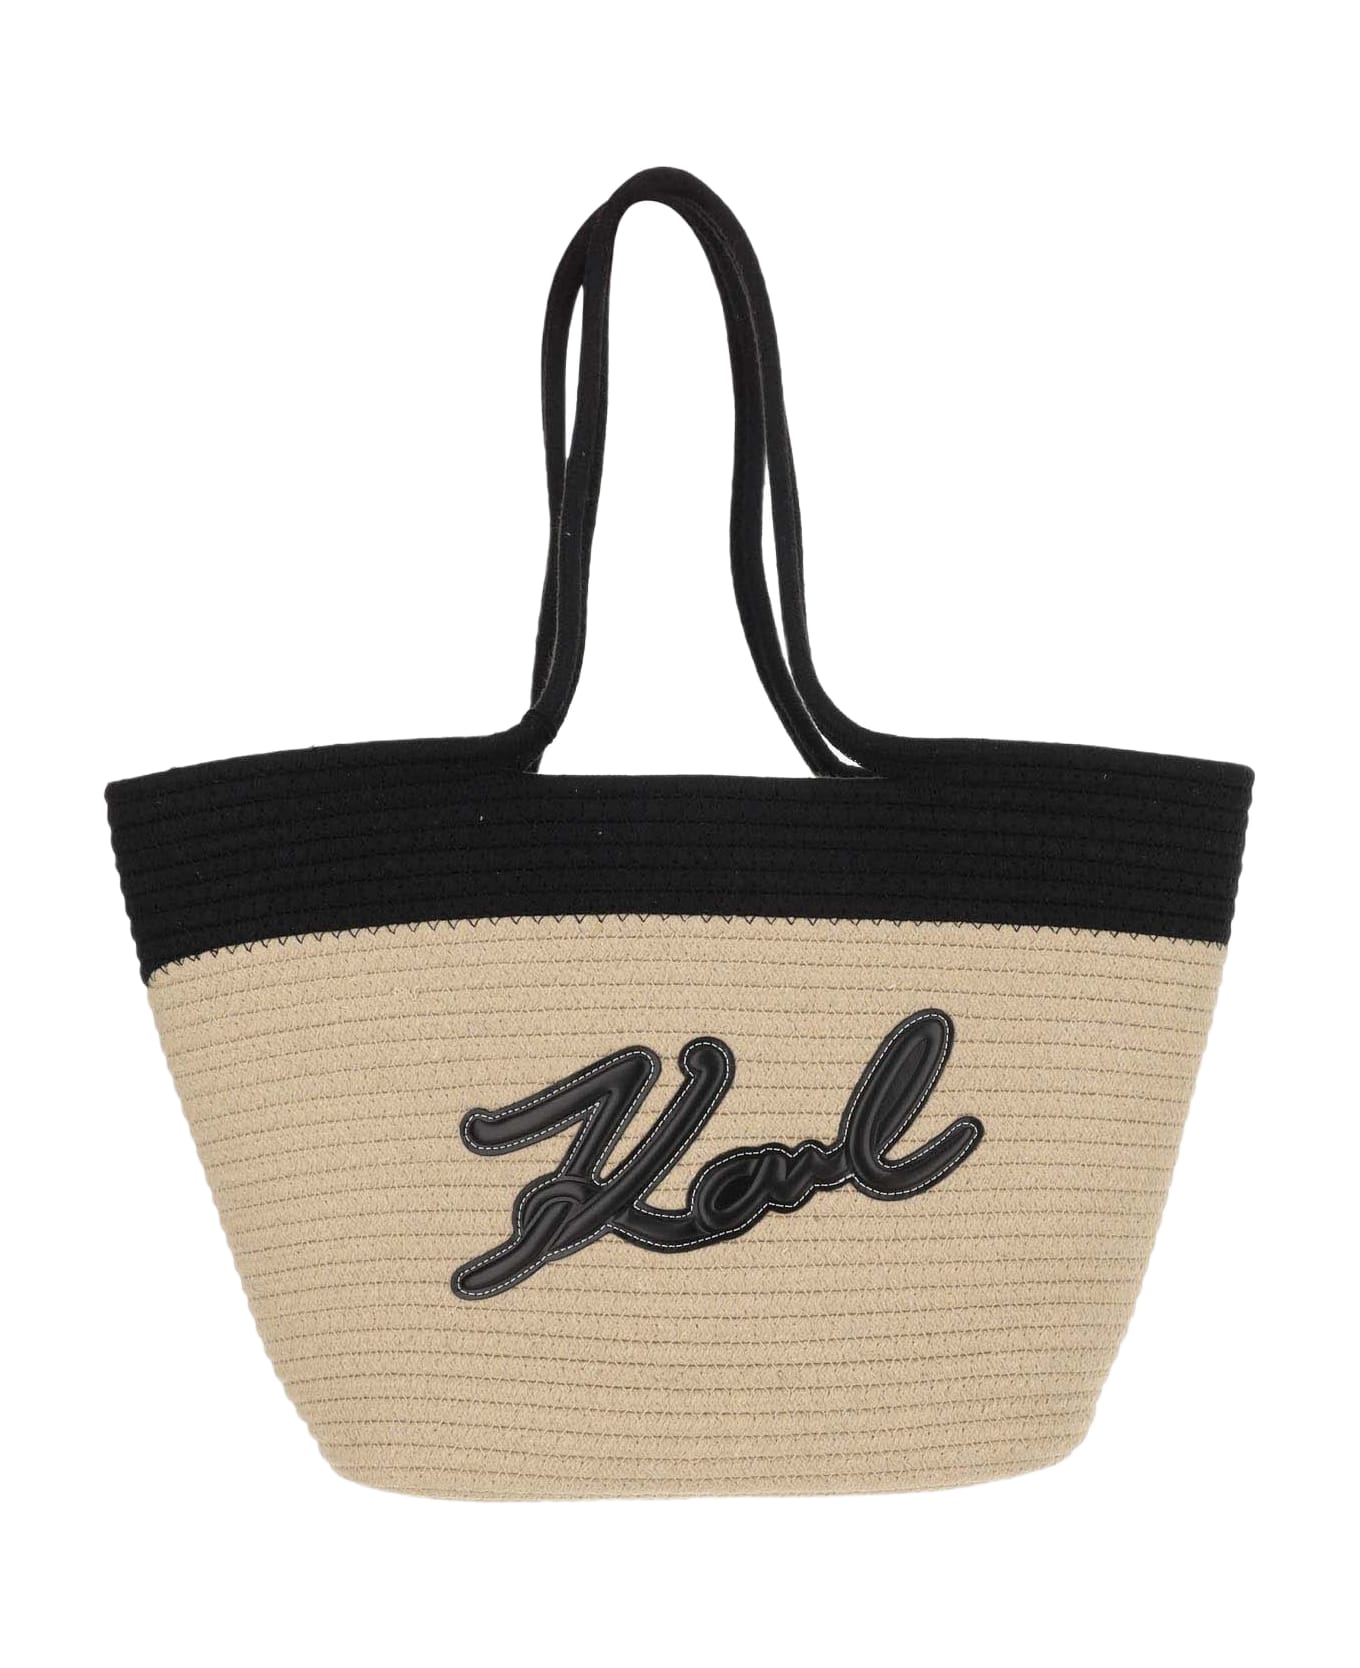 Karl Lagerfeld Fabric Tote Bag With Logo - Black